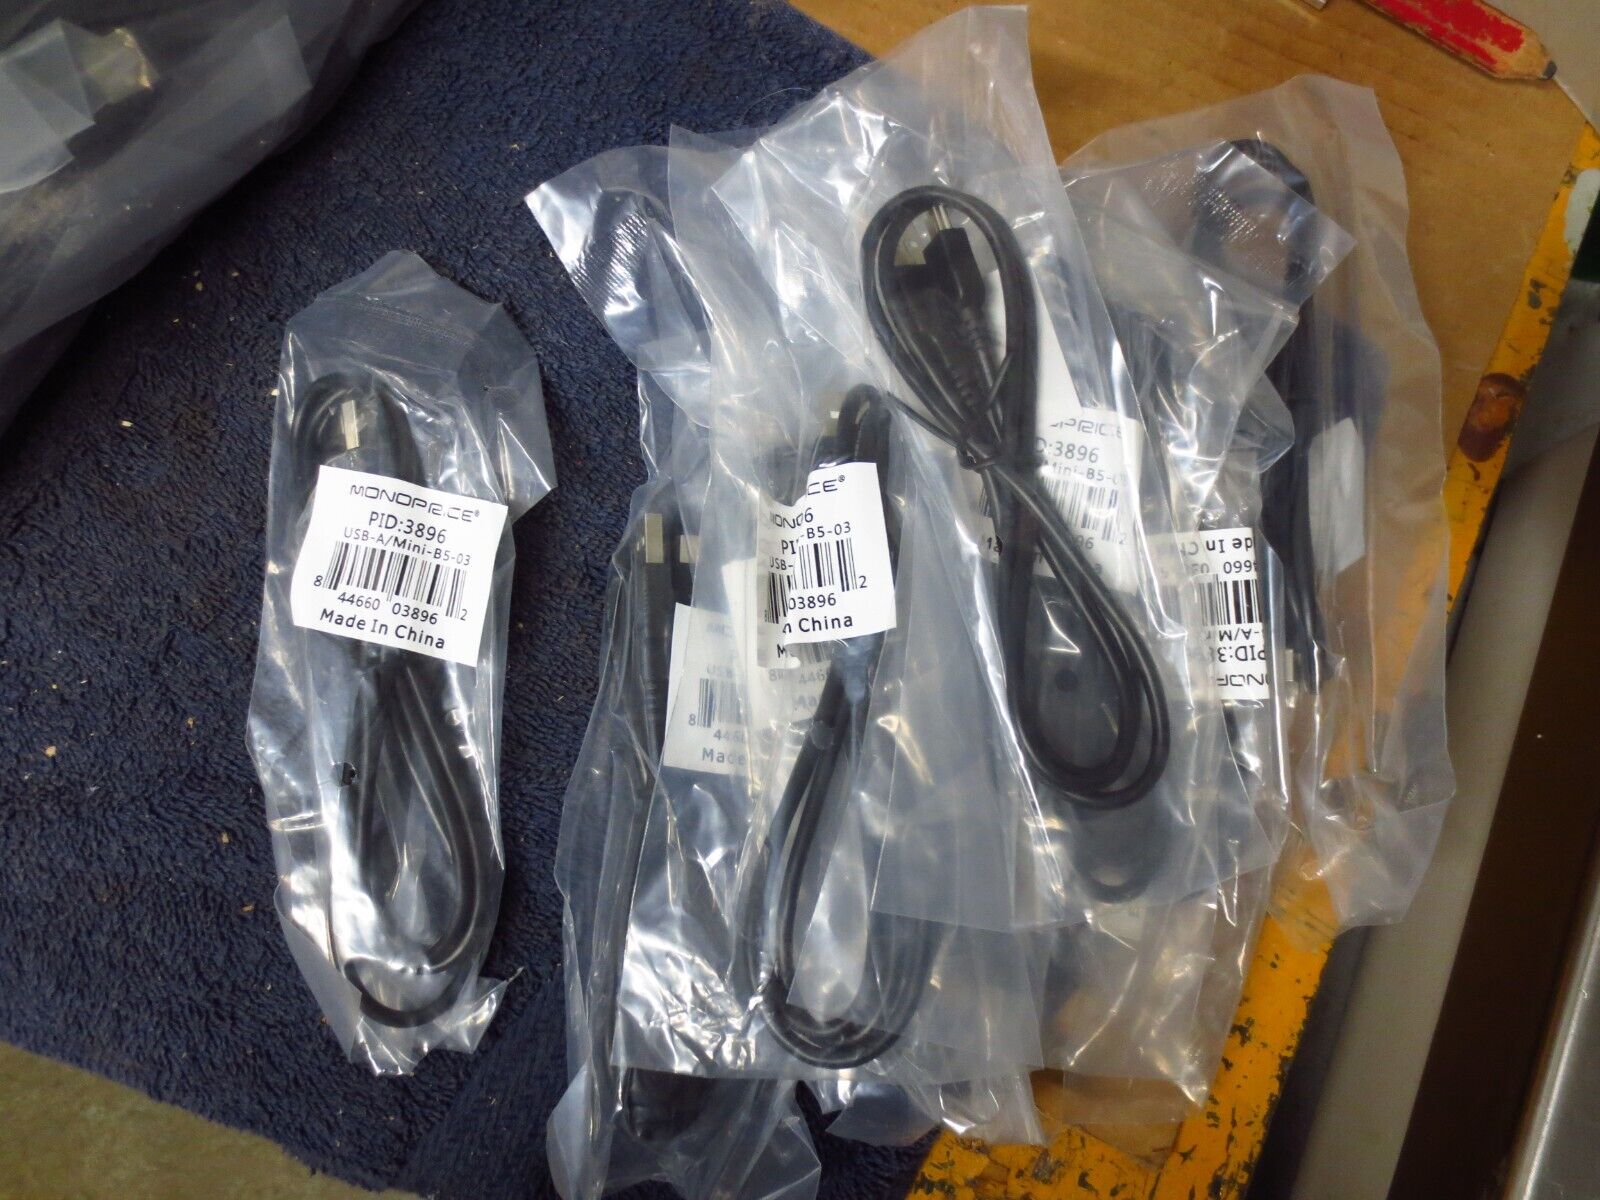 Lot of 10 Quality Monoprice PID 3896 USB A to Mini-B5-03 Cable 3 Foot Long